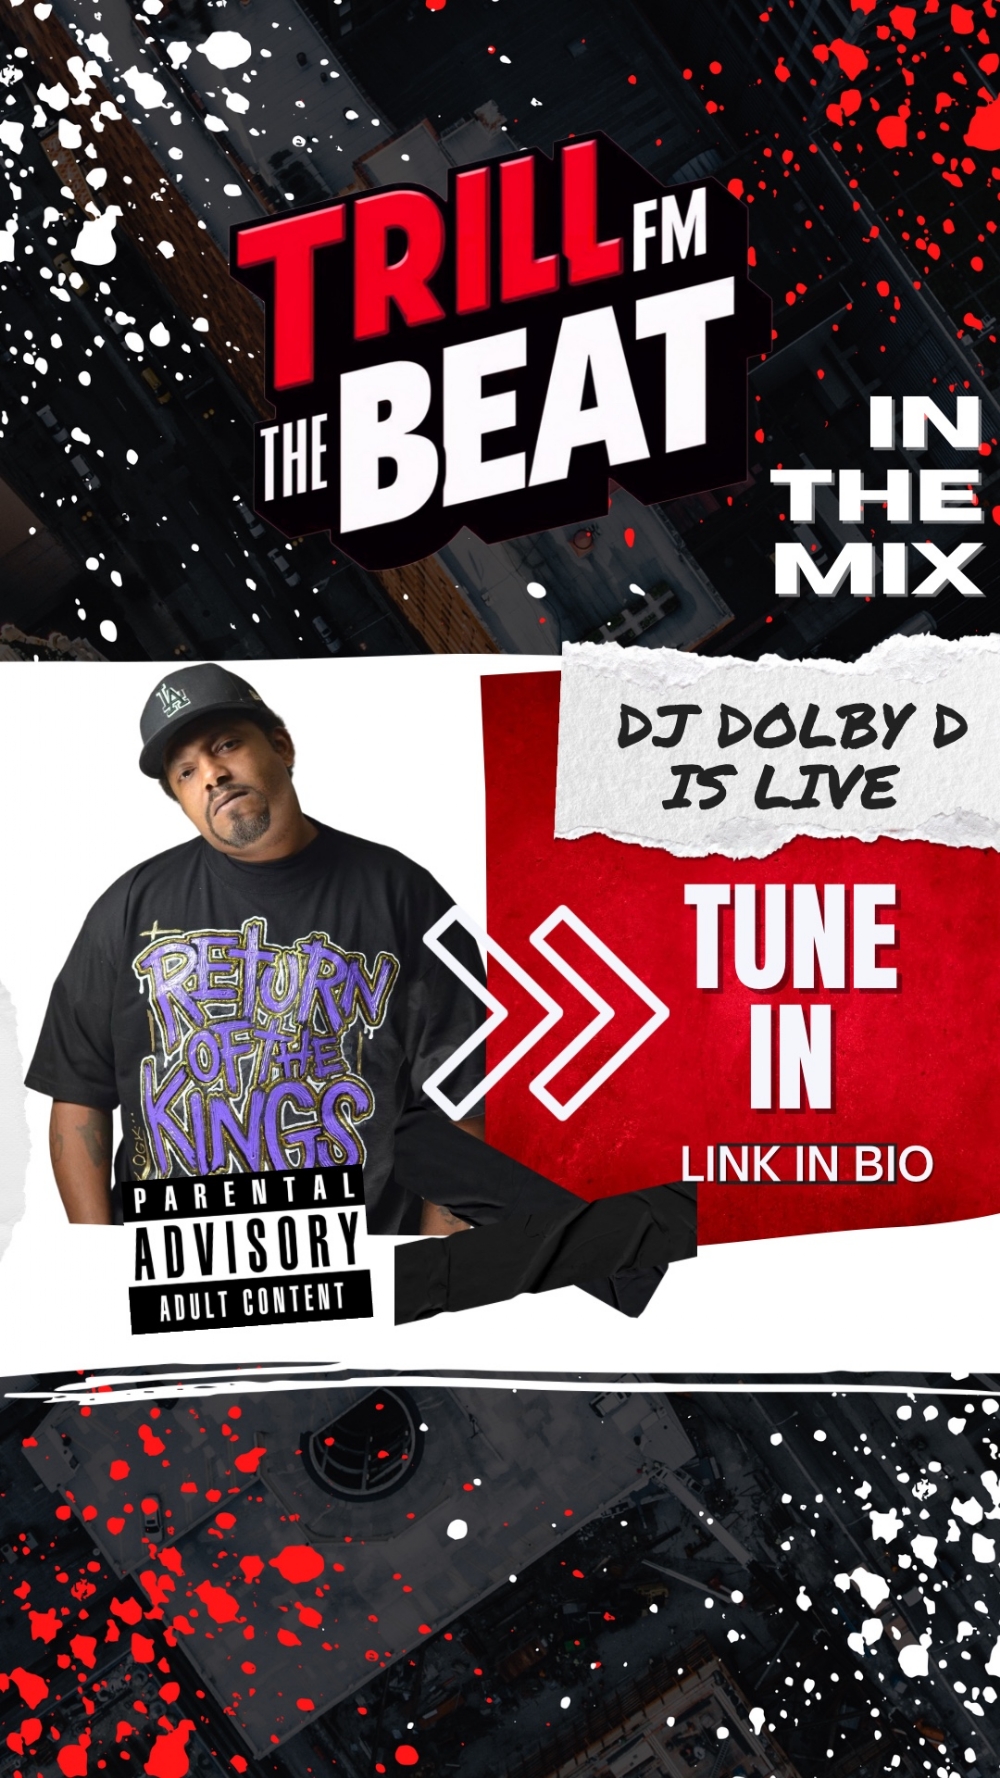 DJ DOLBY D is LIVE!